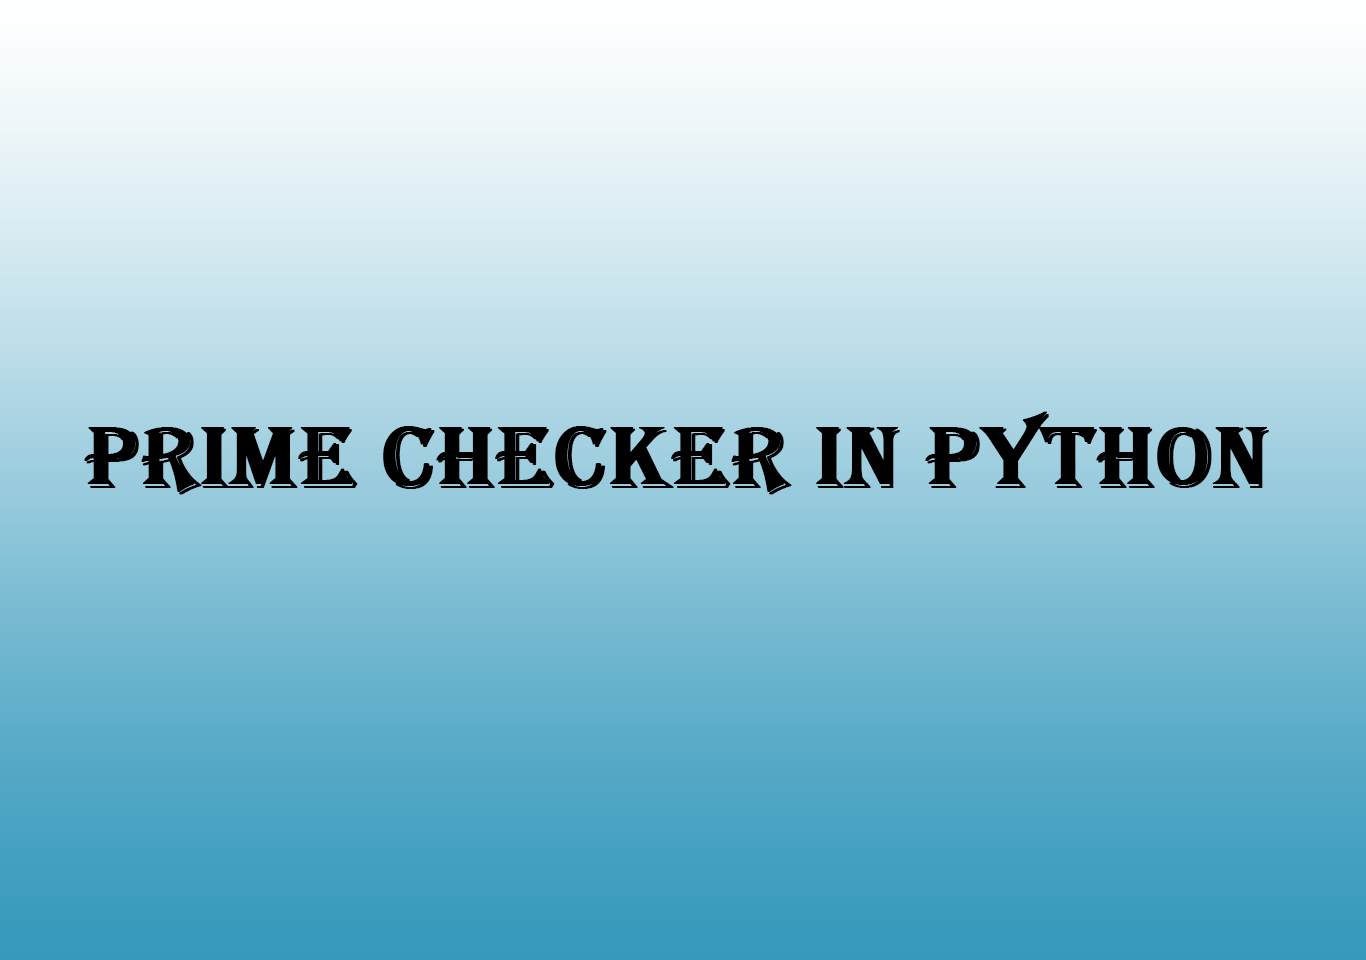 Prime checker in python with source code